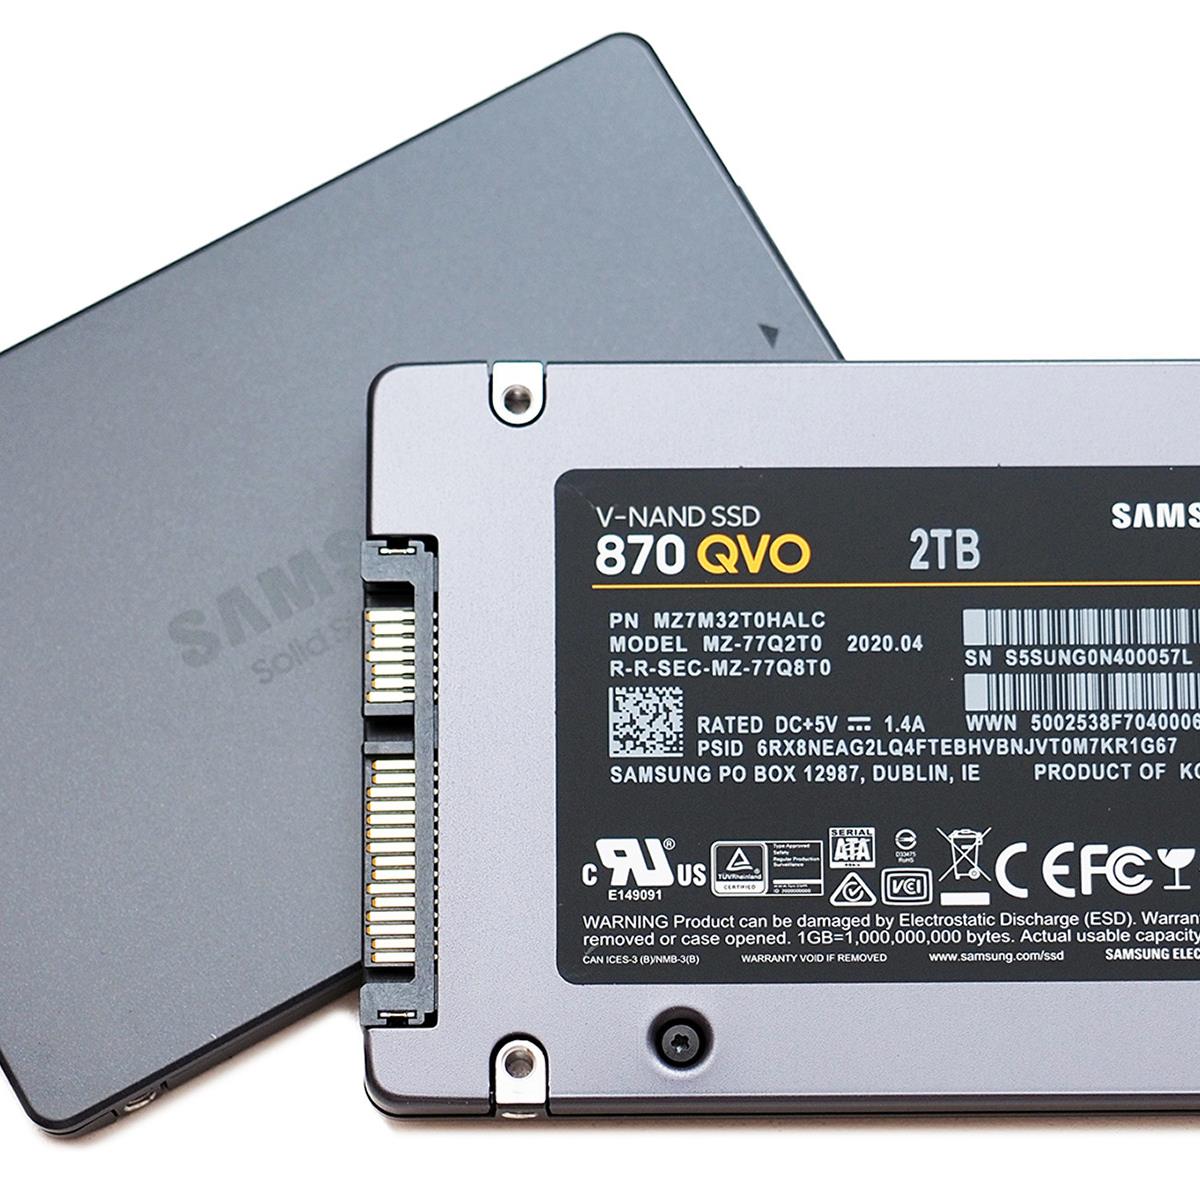 Samsung SSD 870 QVO 2TB SSD Falls To Just $199, Apple AirPods Pro 